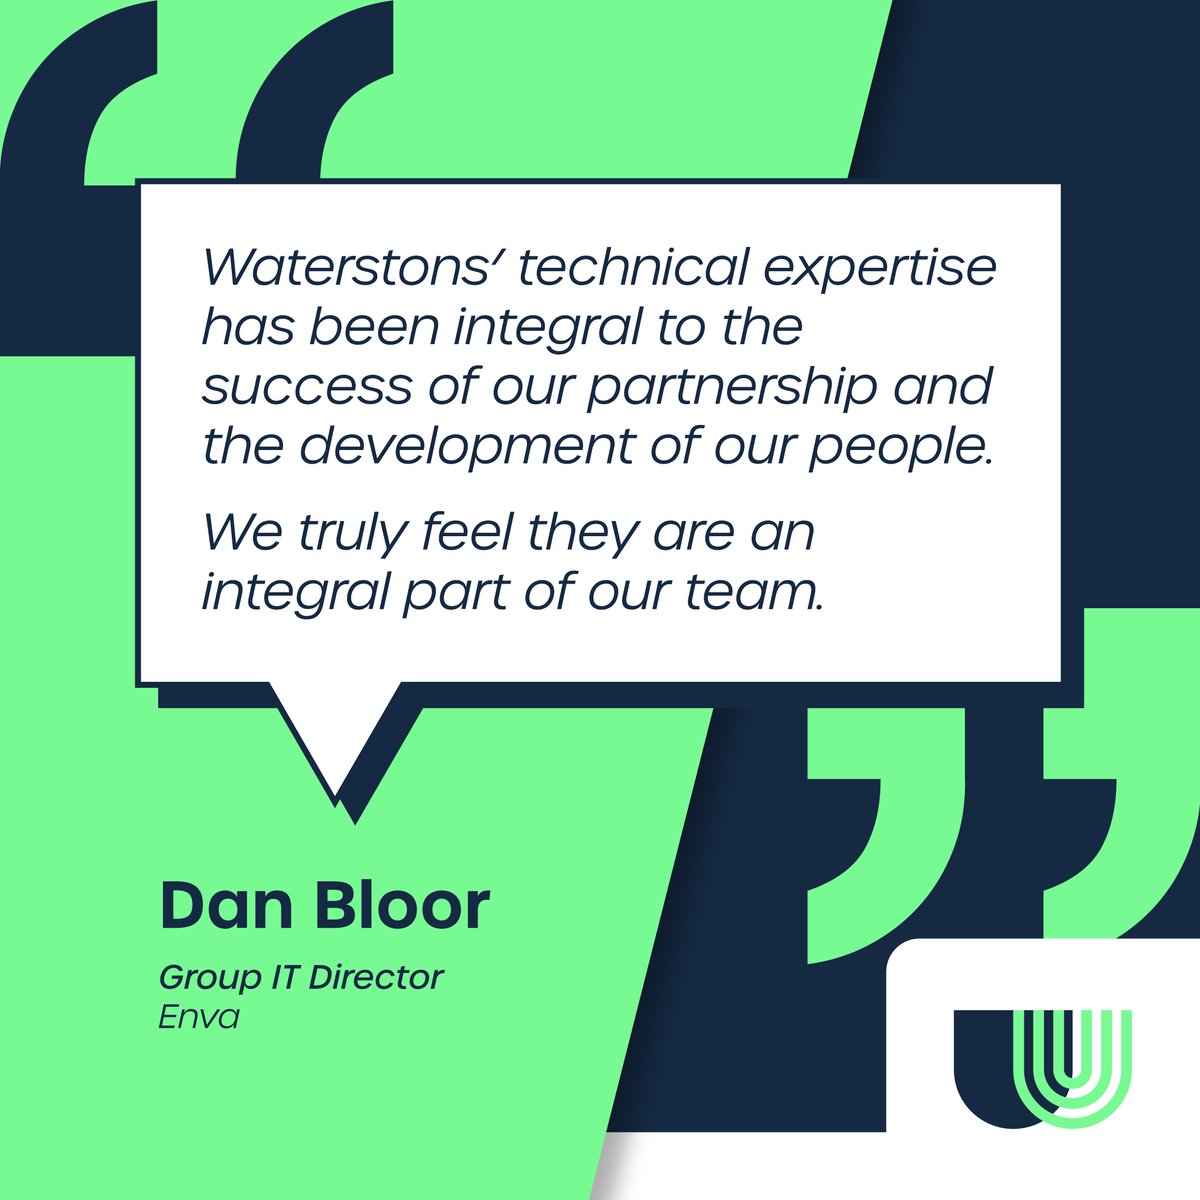 We had some great feedback from our client, @envagroup. By building from the ground up, we’ve worked collaboratively to create what Enva wanted to deliver and implement the processes and systems needed to succeed. Read the full case study here: waterstons.com/insights/case-…